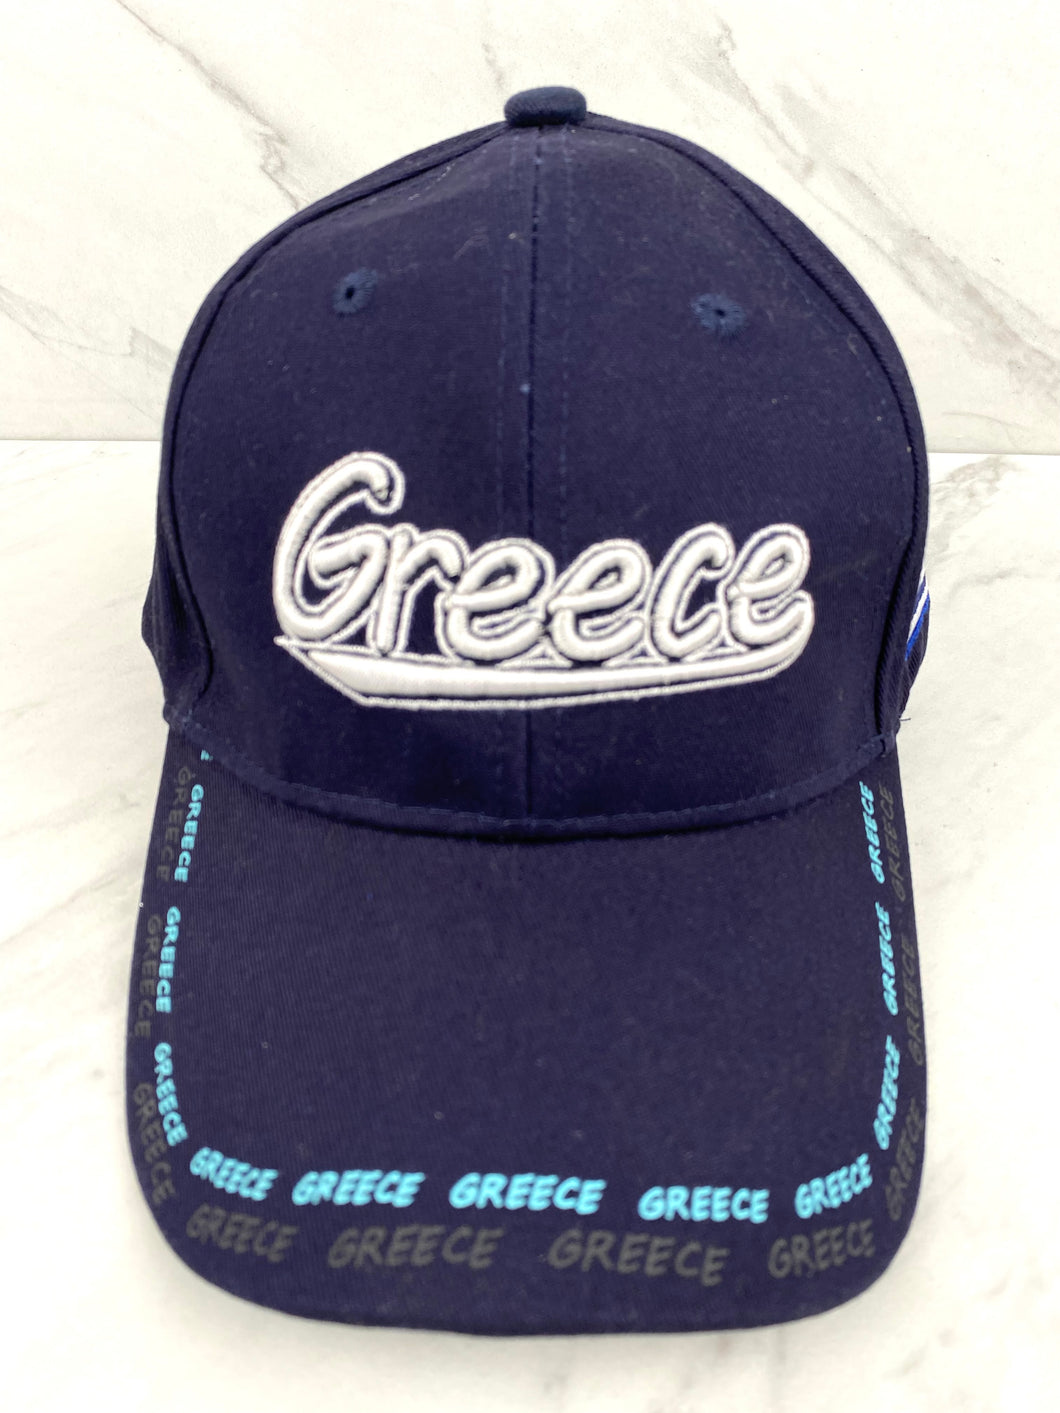 Embroidered Greece Baseball Cap BH20229  made in Greece